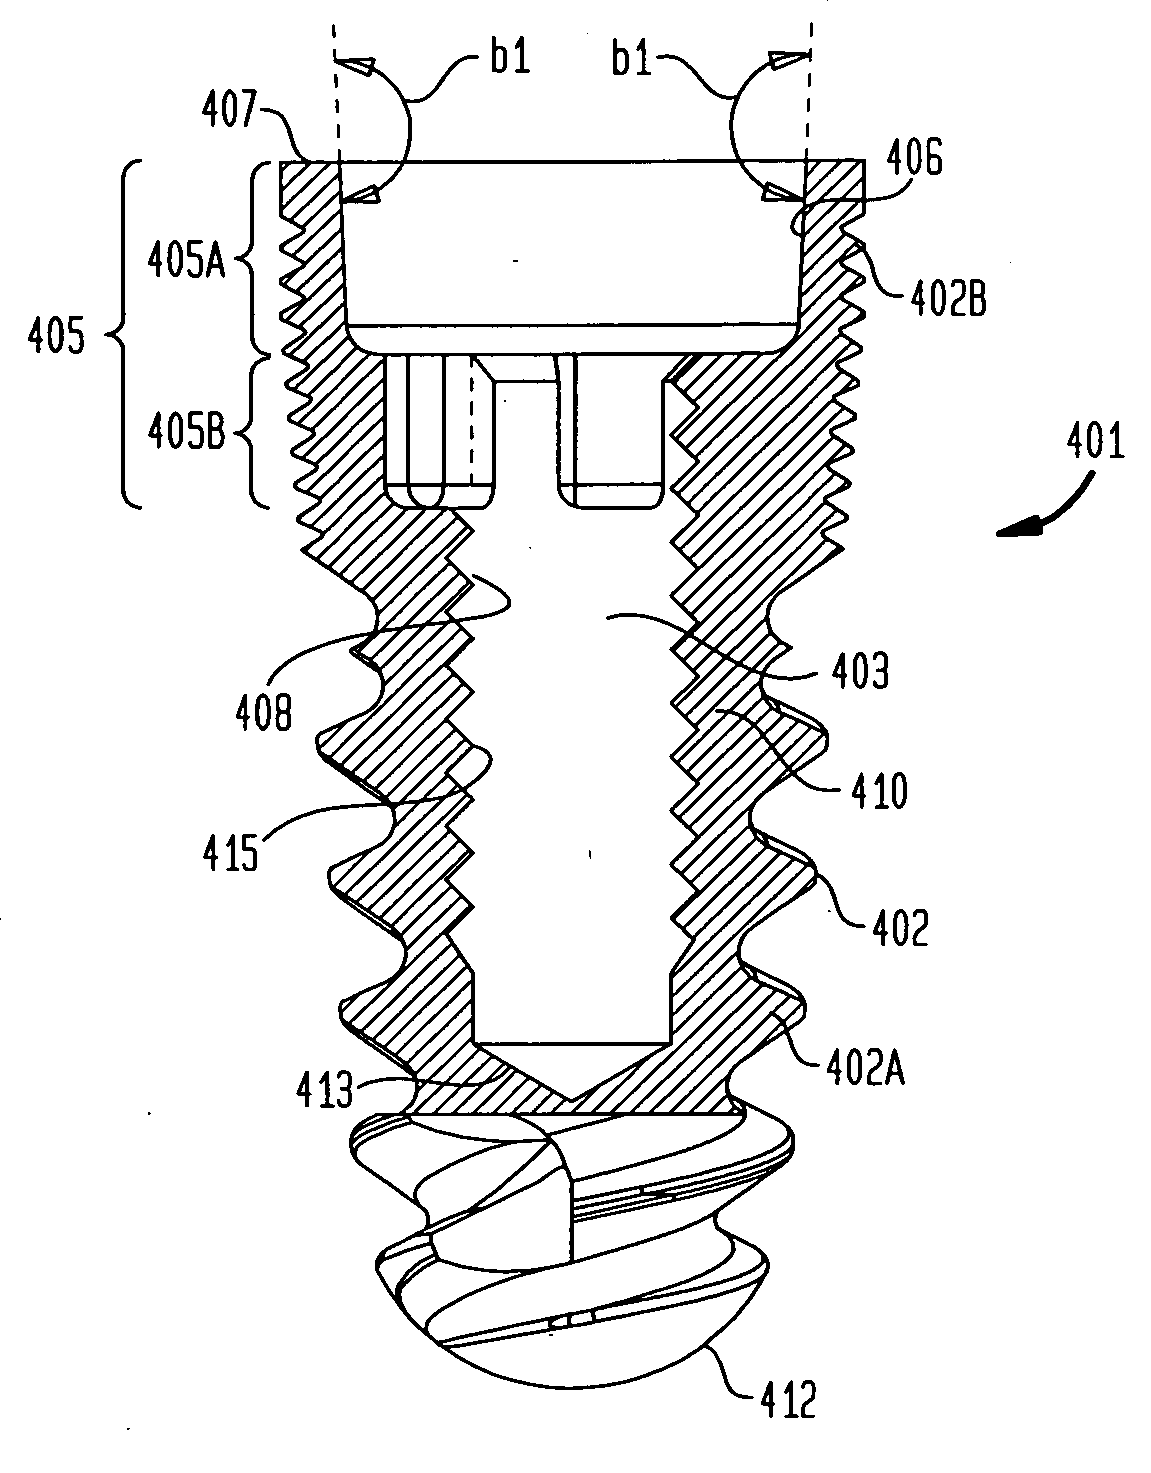 Dental implant and abutment mating system